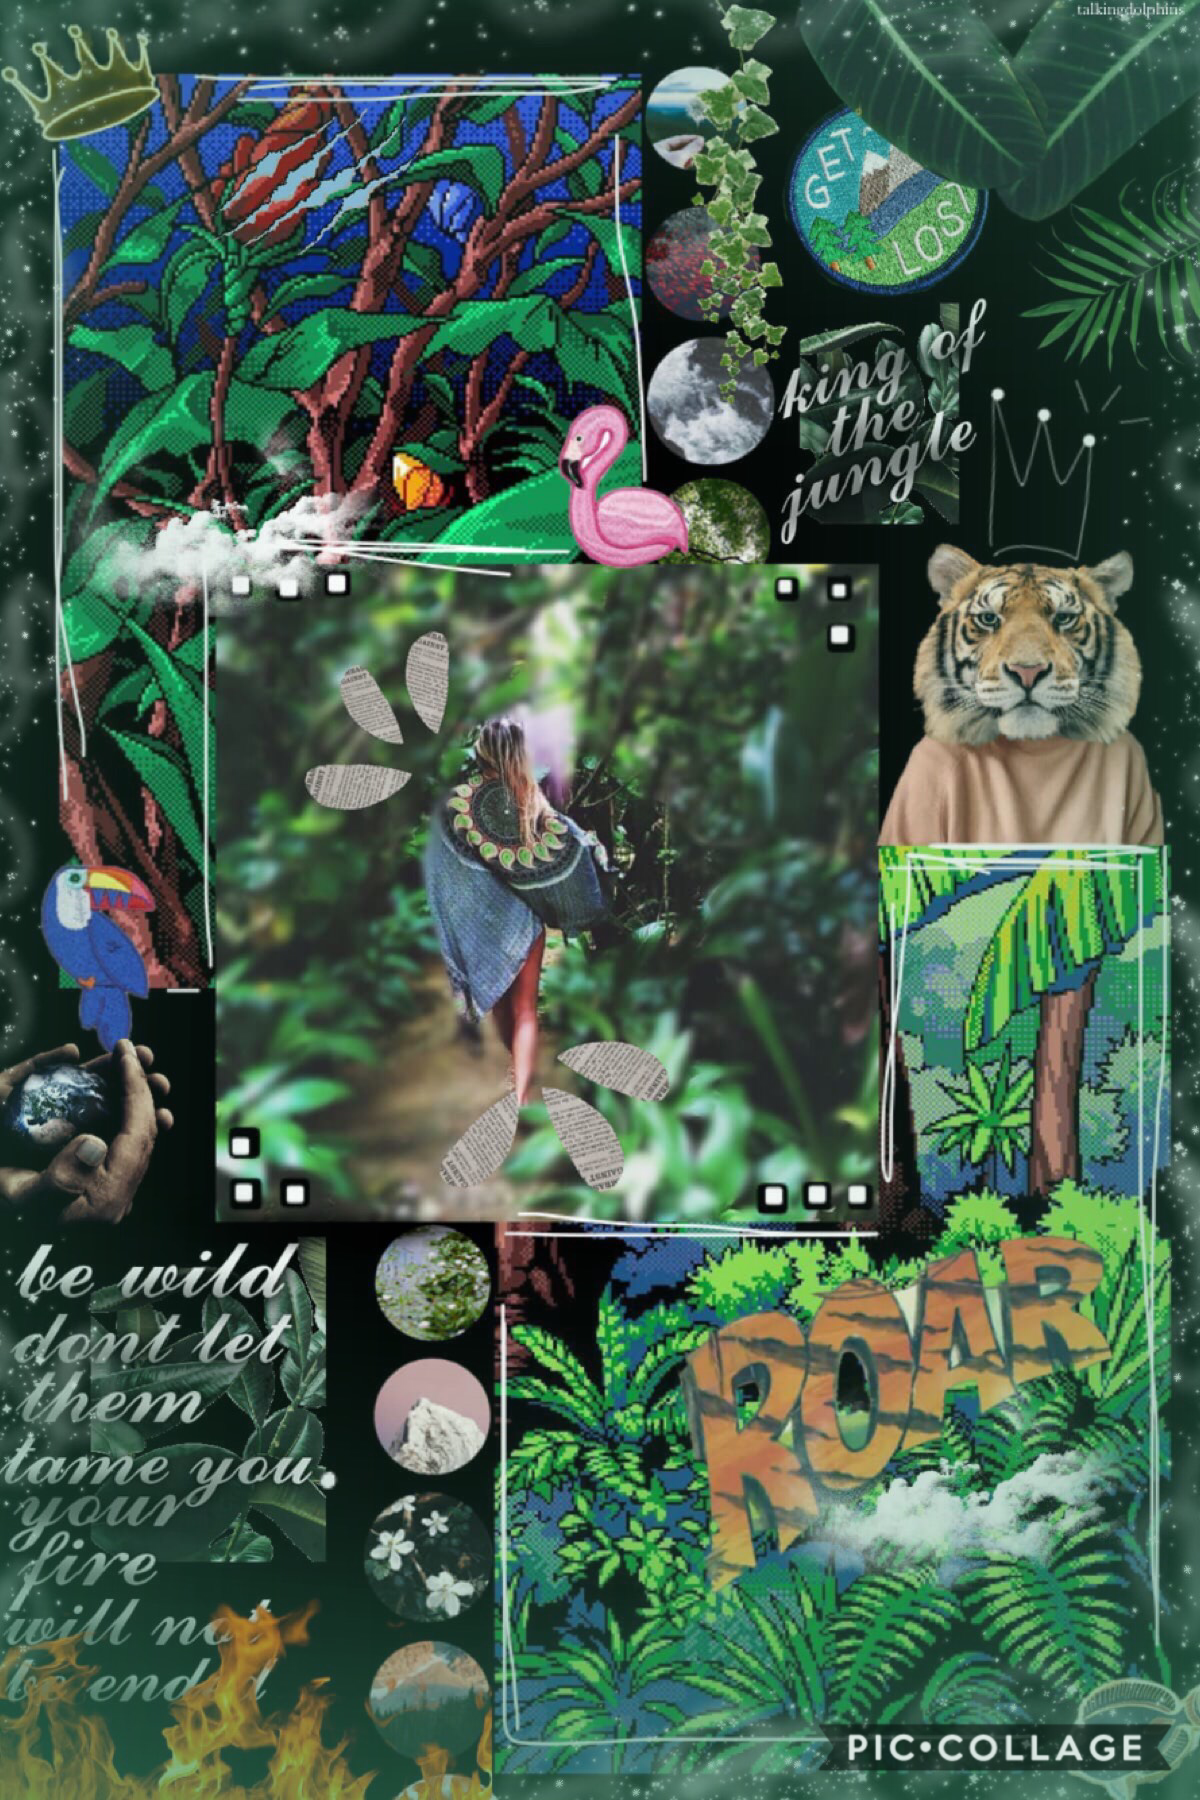 🌿tap🌿
Thank you for the feature on my most recent collage piccollage! It rained for the 1st time in weeks yesterday night, it was wonderful. Have an amazing day💗